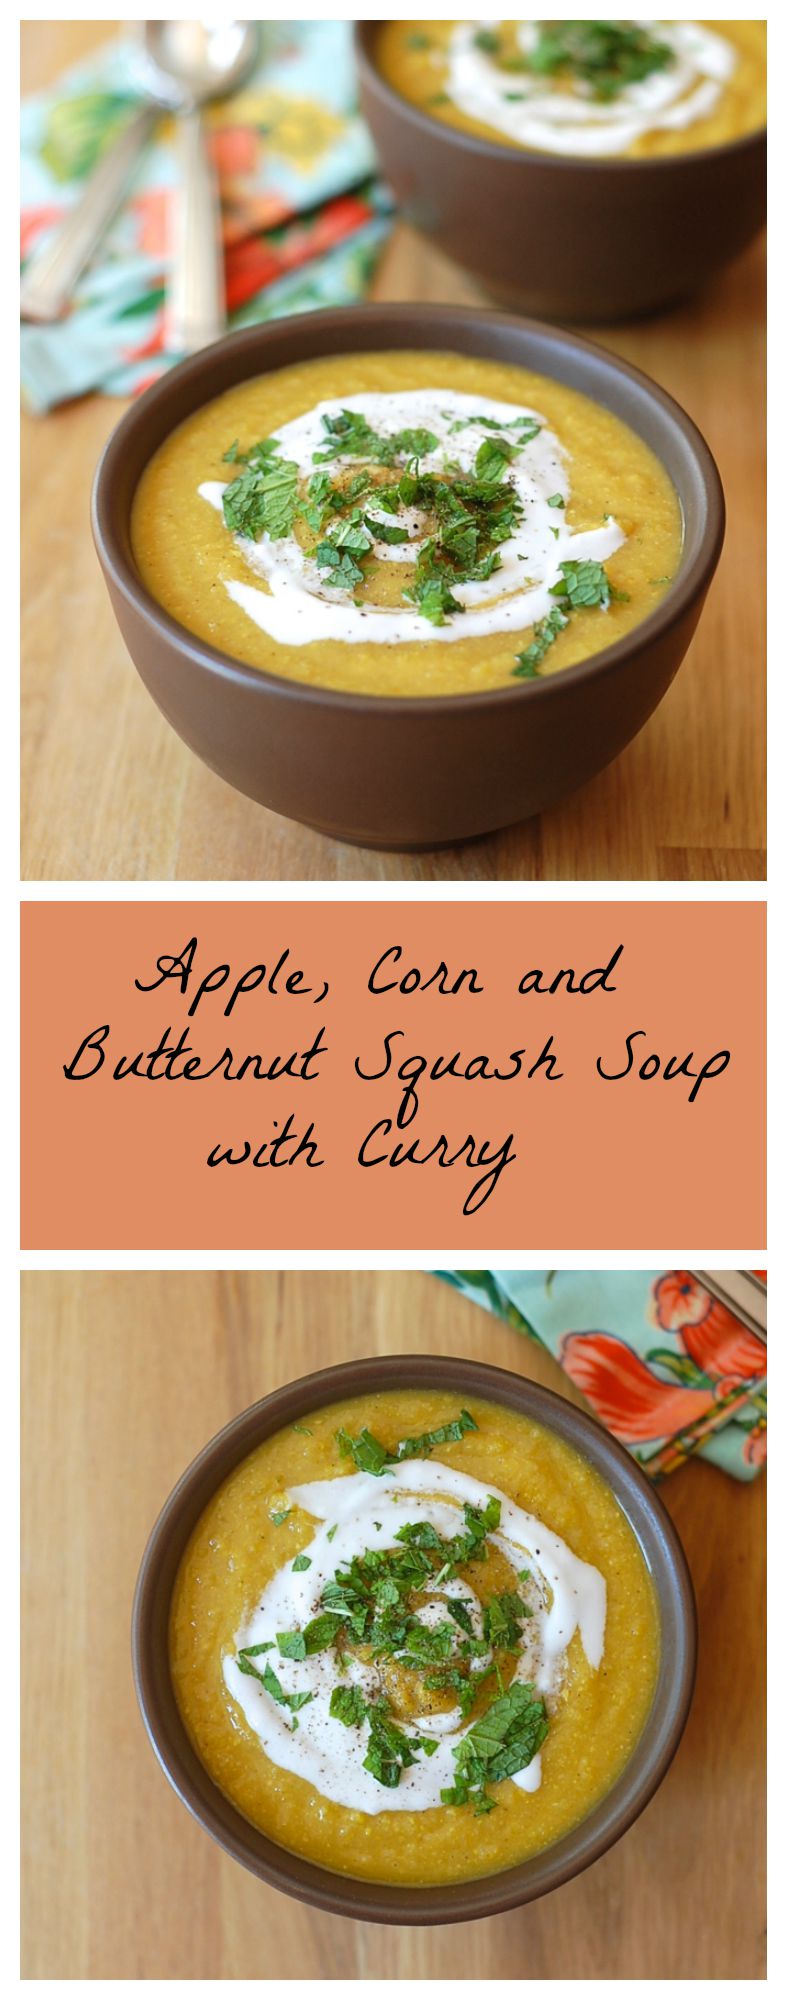 apple, corn and butternut squash soup with curry